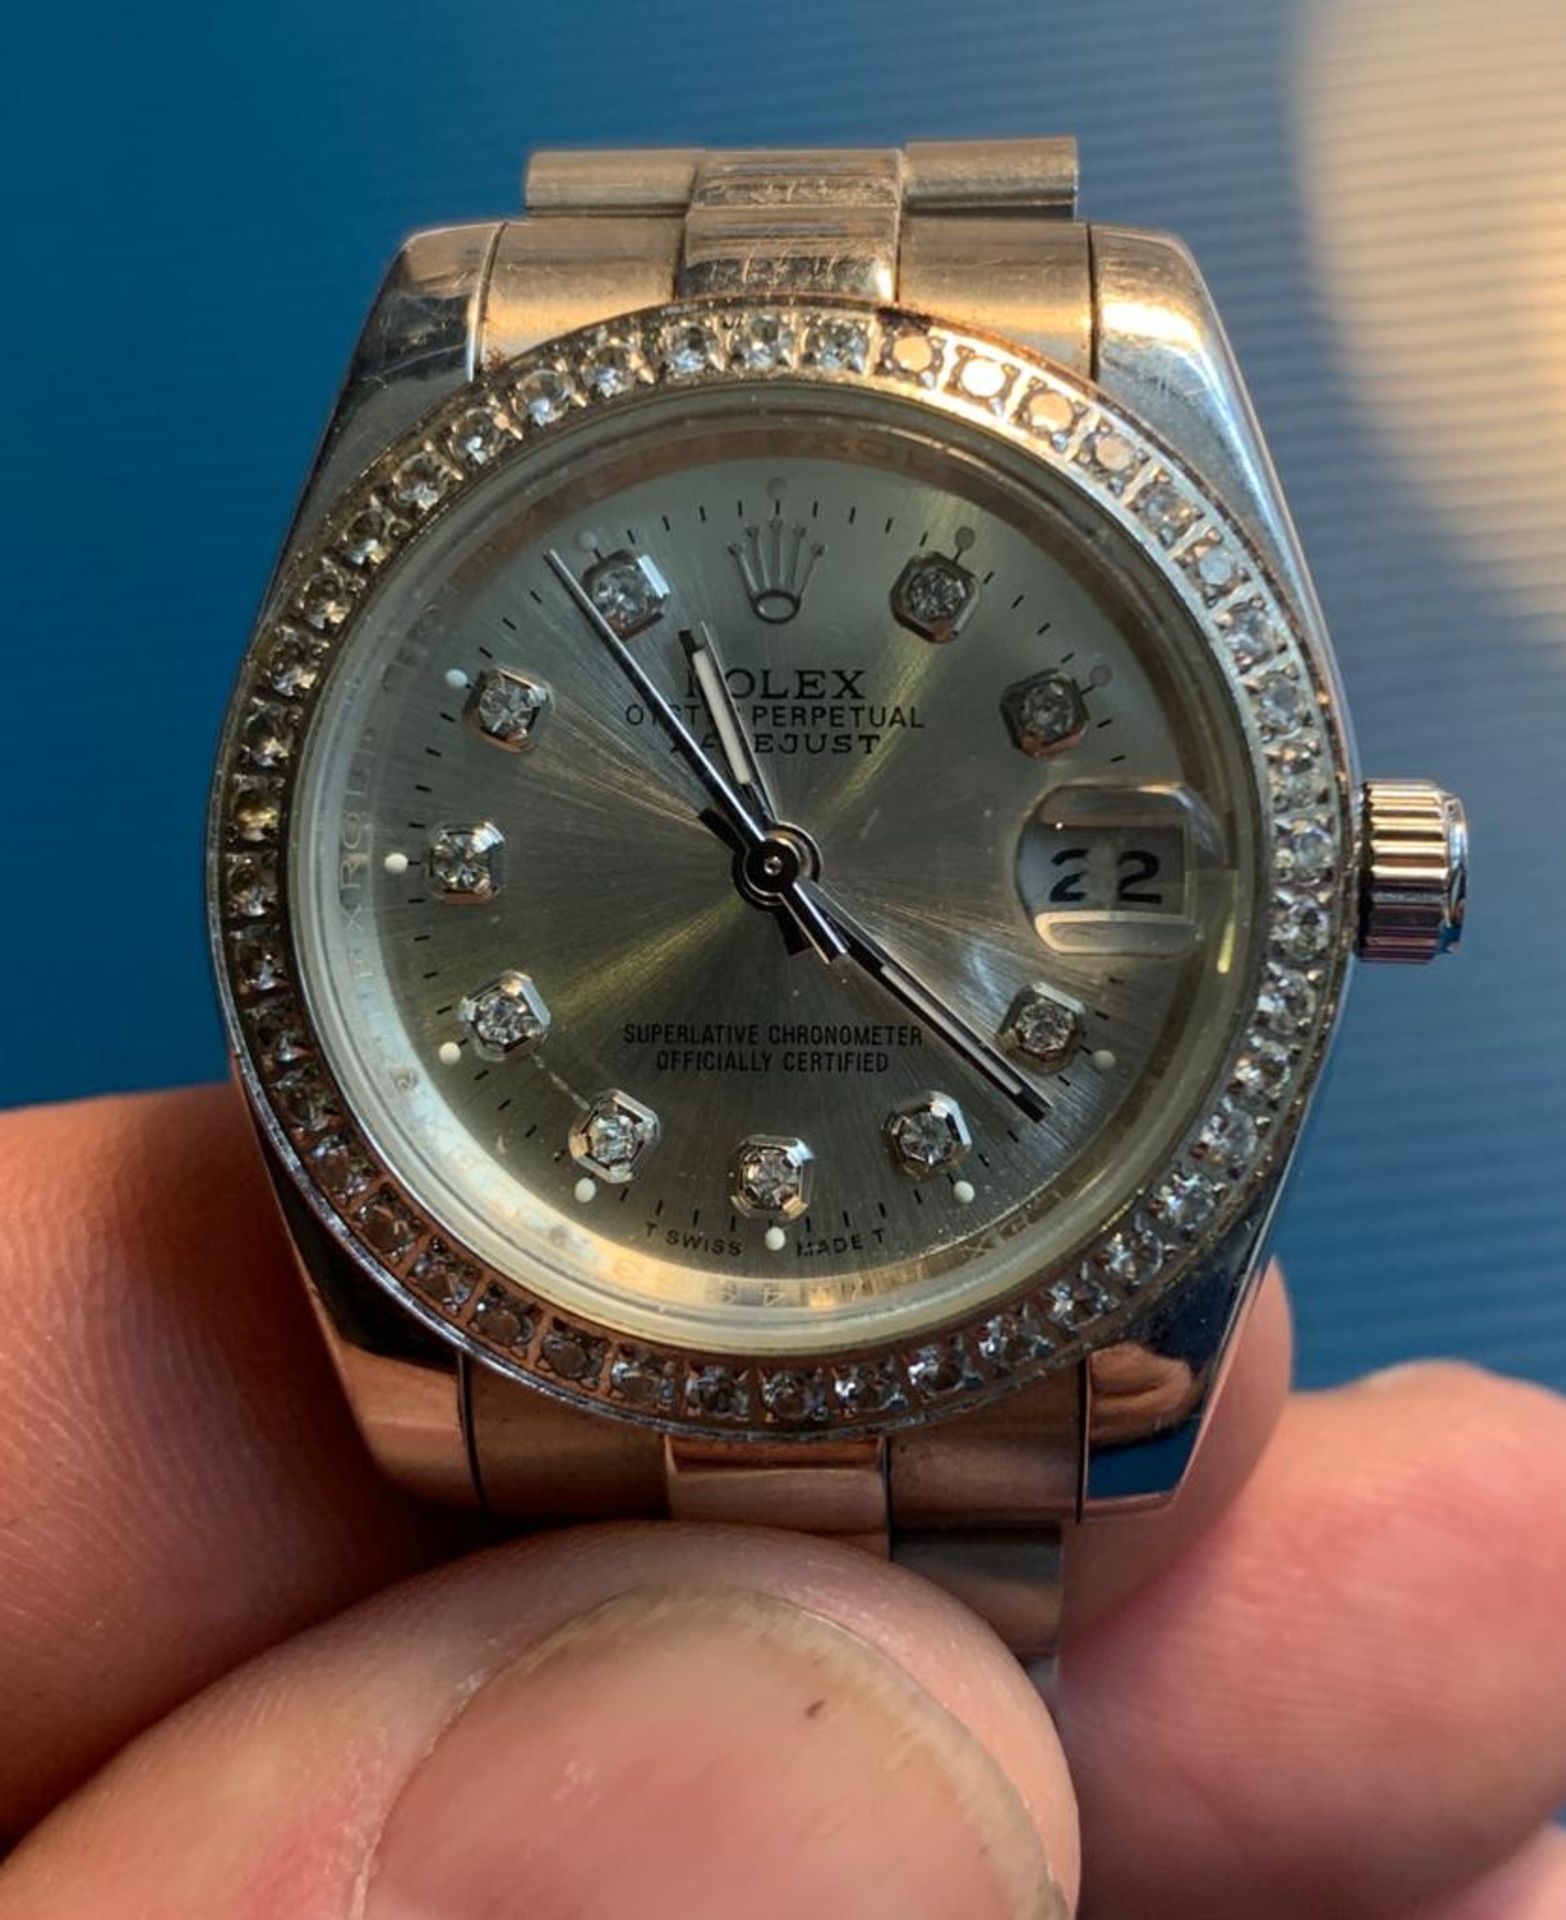 ROLEX OYSTER PERPETUAL DATEJUST SWISS MADE WRIST WATCH - NO PAPERS ASSUME NON GENUINE *NO VAT* - Image 3 of 10